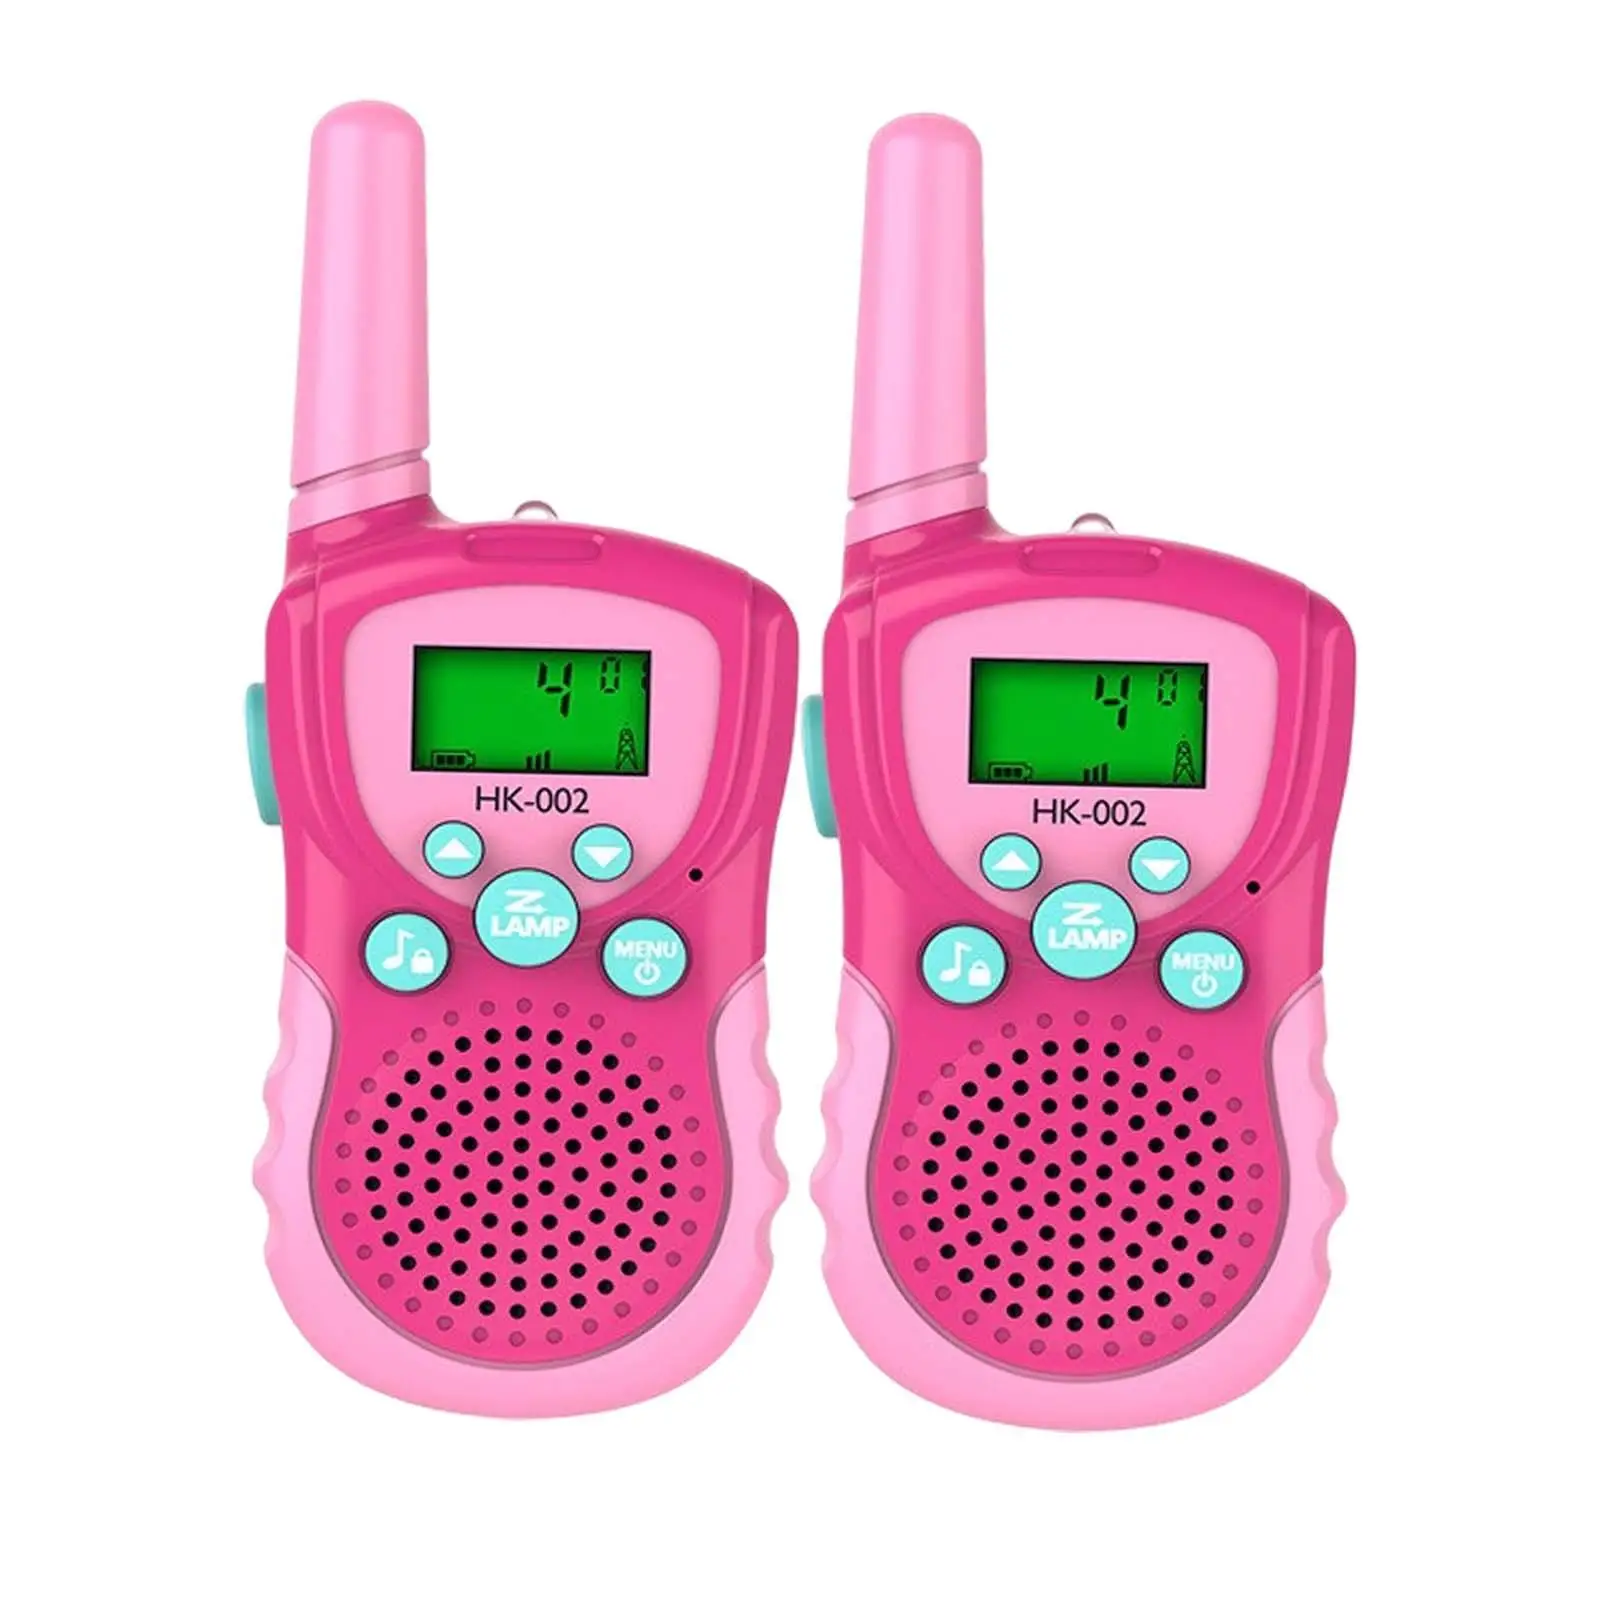 2x Walkie Talkies for Kids Walky Talky Toy for Games 3-14 Years Old Hiking